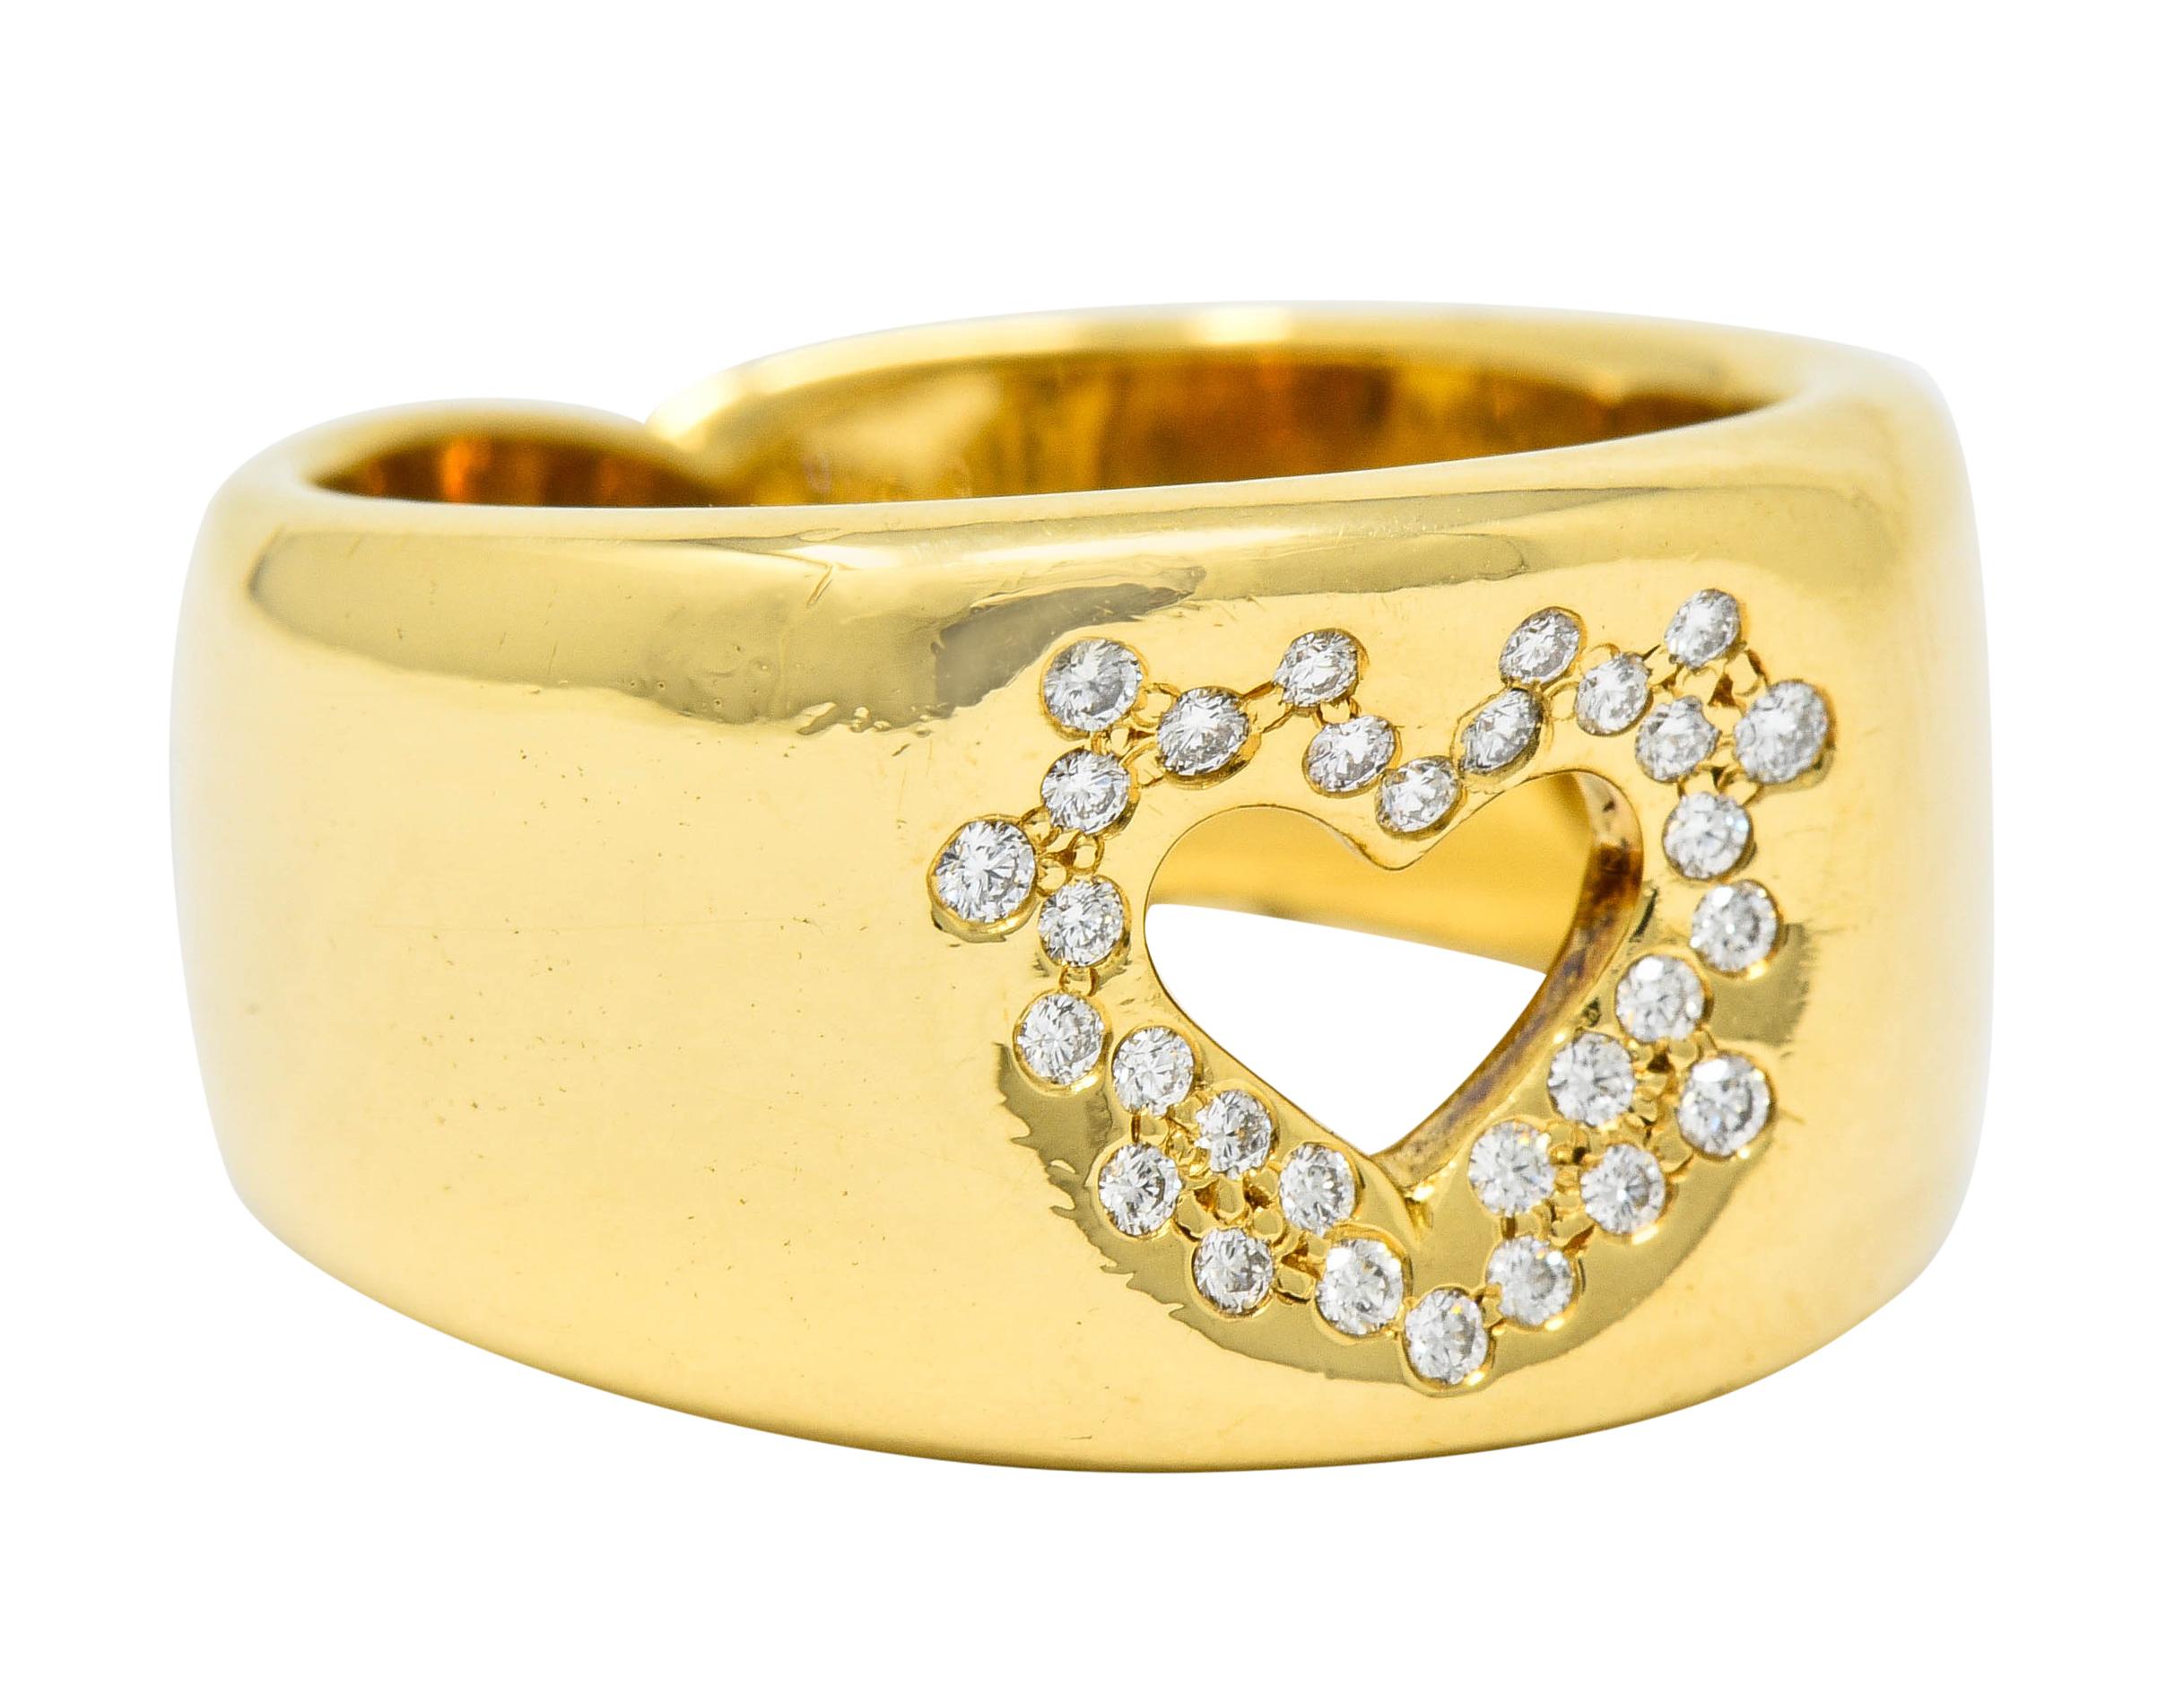 Wide band ring centering a pierced heart motif

Sprinkled with flush set diamonds weighing approximately 0.30 carat; eye-clean and white

Completed by a sweet shank detail at base

Fully signed Tiffany & Co. and stamped 750 for 18 karat gold

Circa: